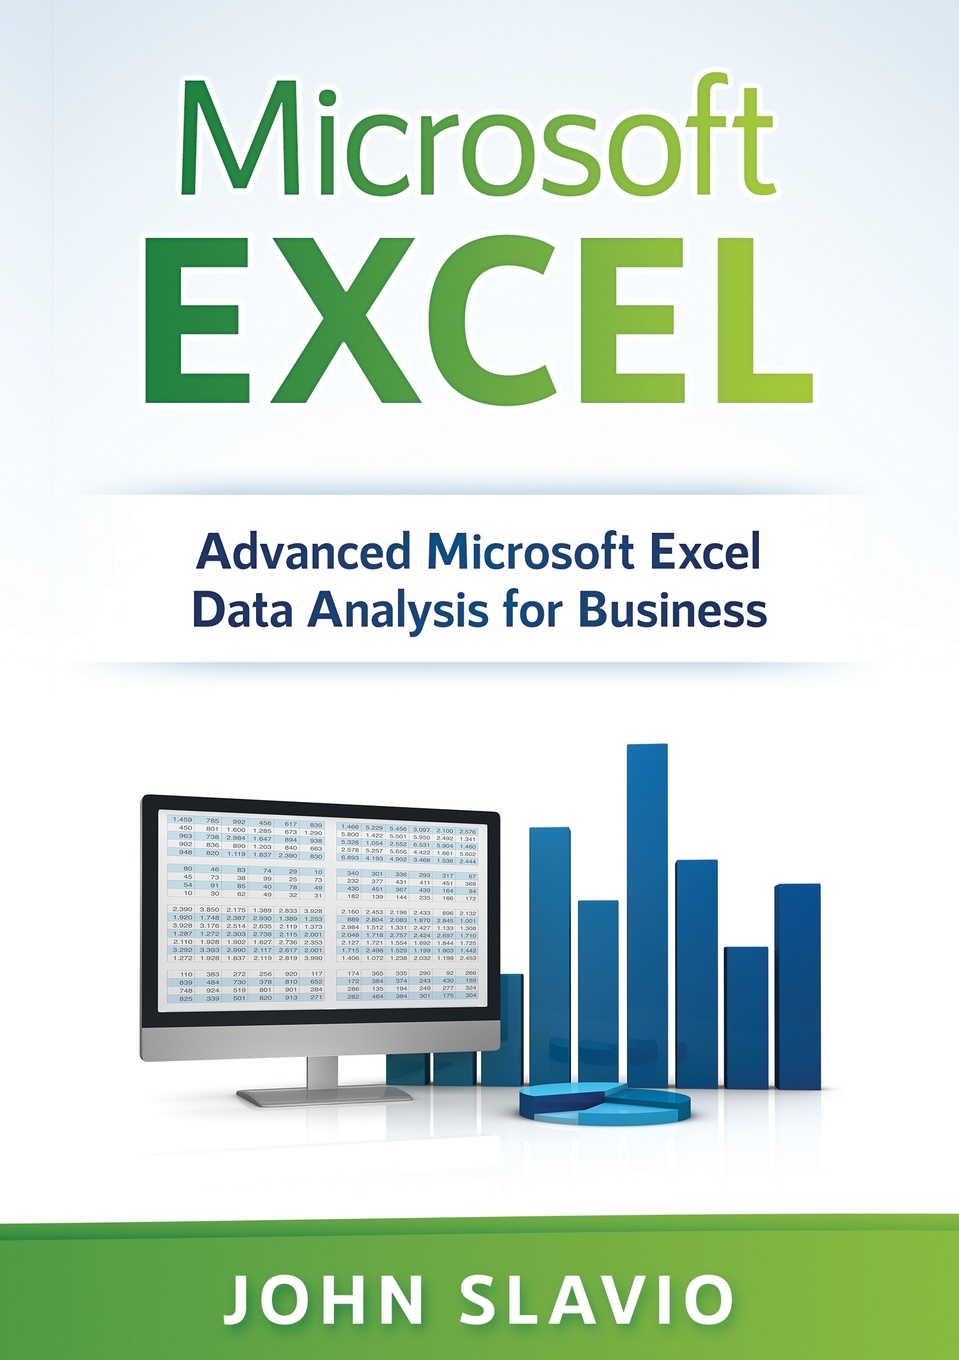 Microsoft Excel. Advanced Microsoft Excel Data Analysis for Business